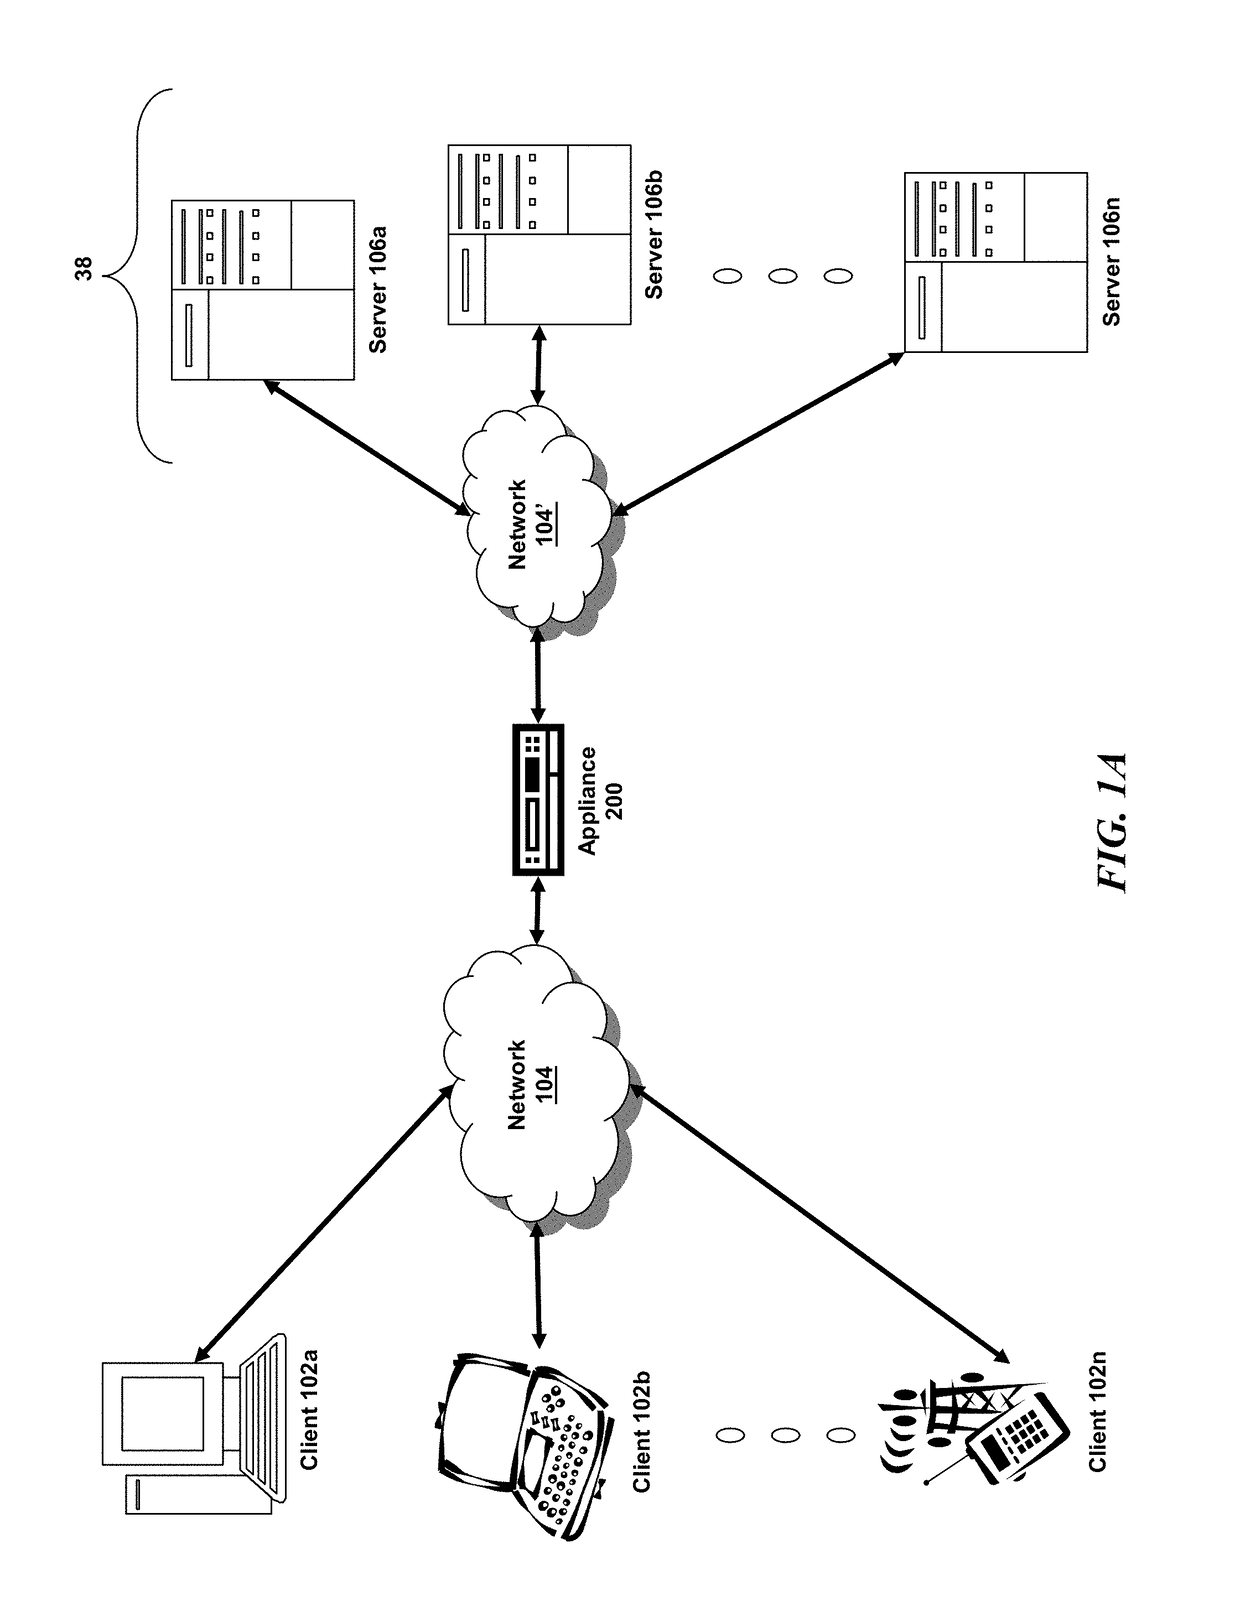 Systems and methods for bridging between public and private clouds through multilevel API integration